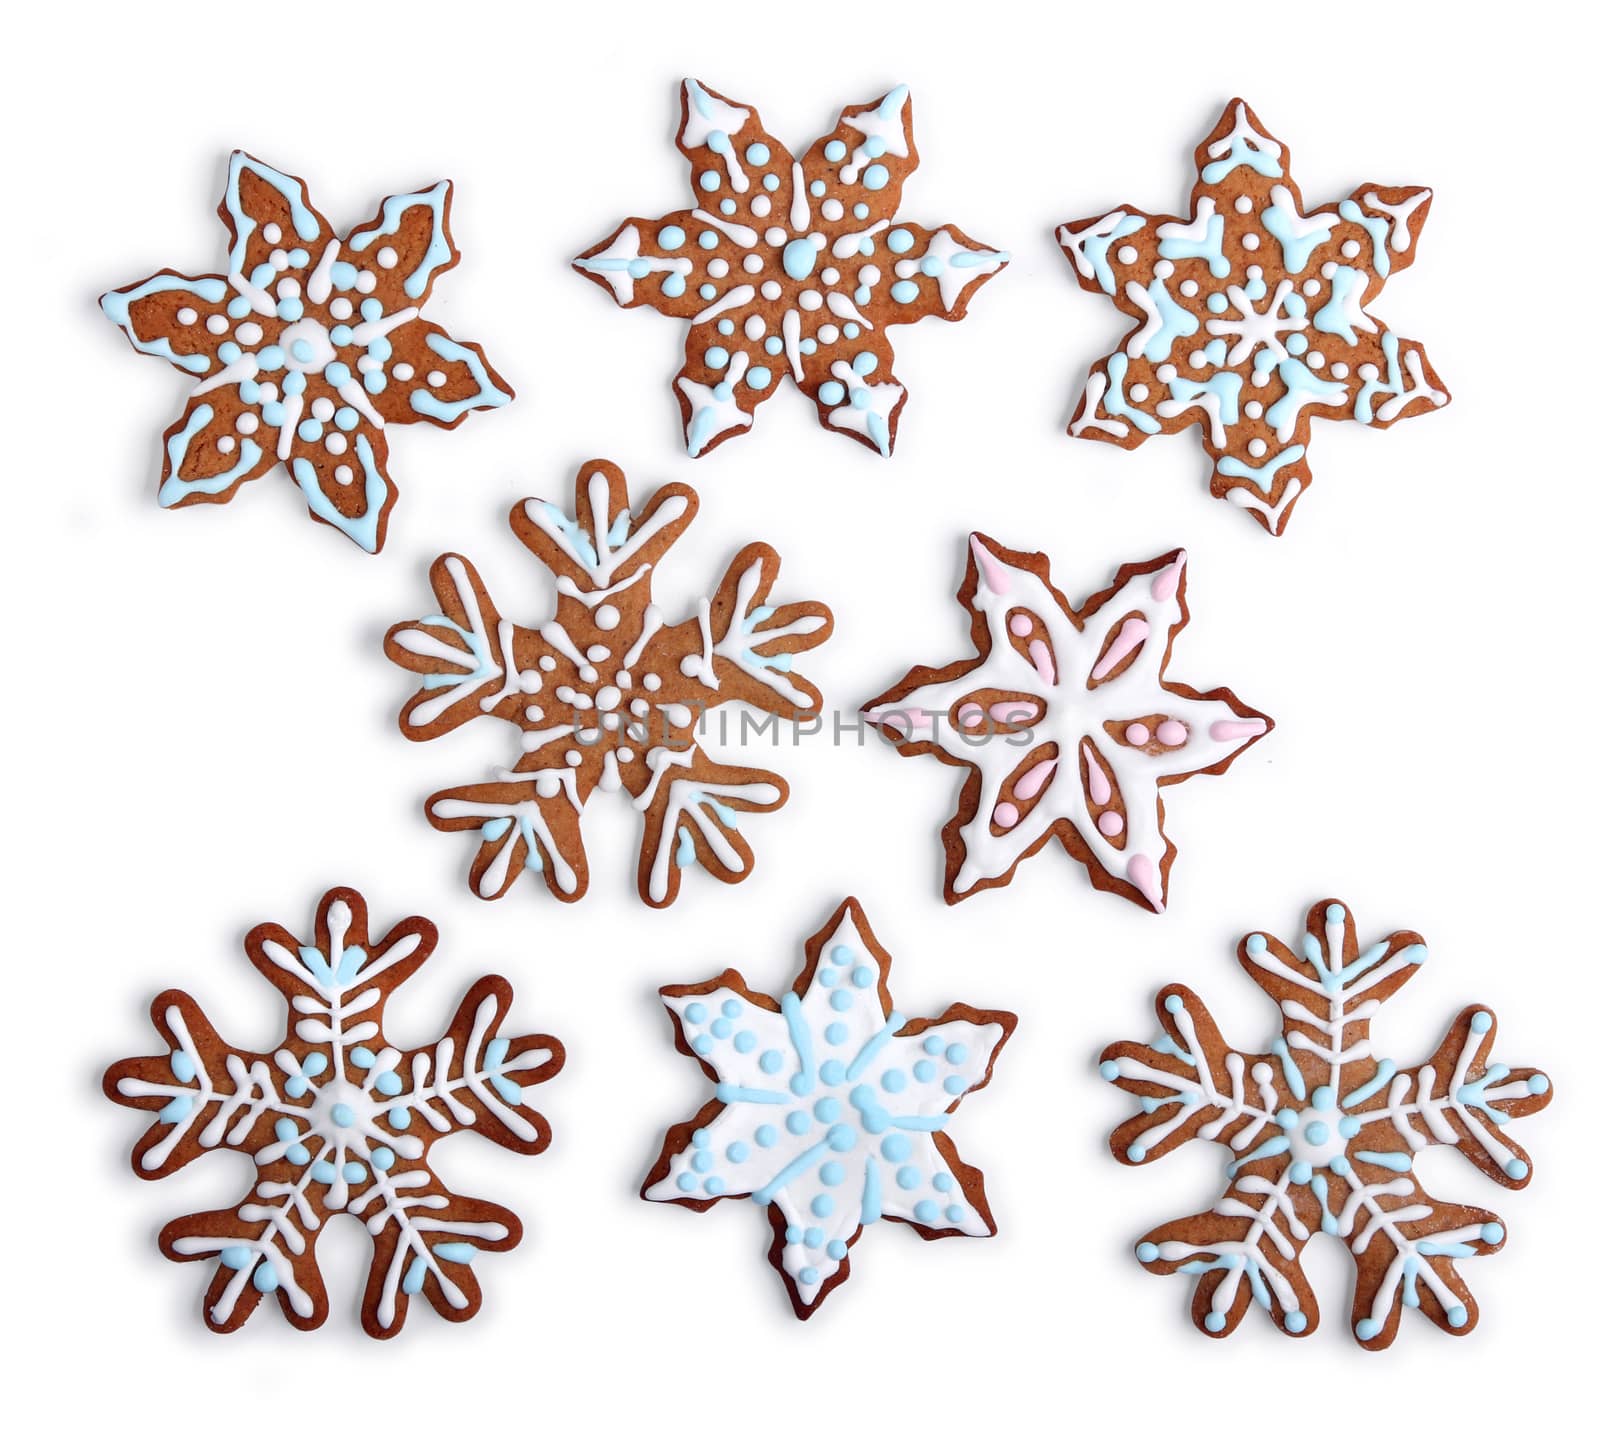 Snowflake shaped gingerbread cookies home made by anterovium